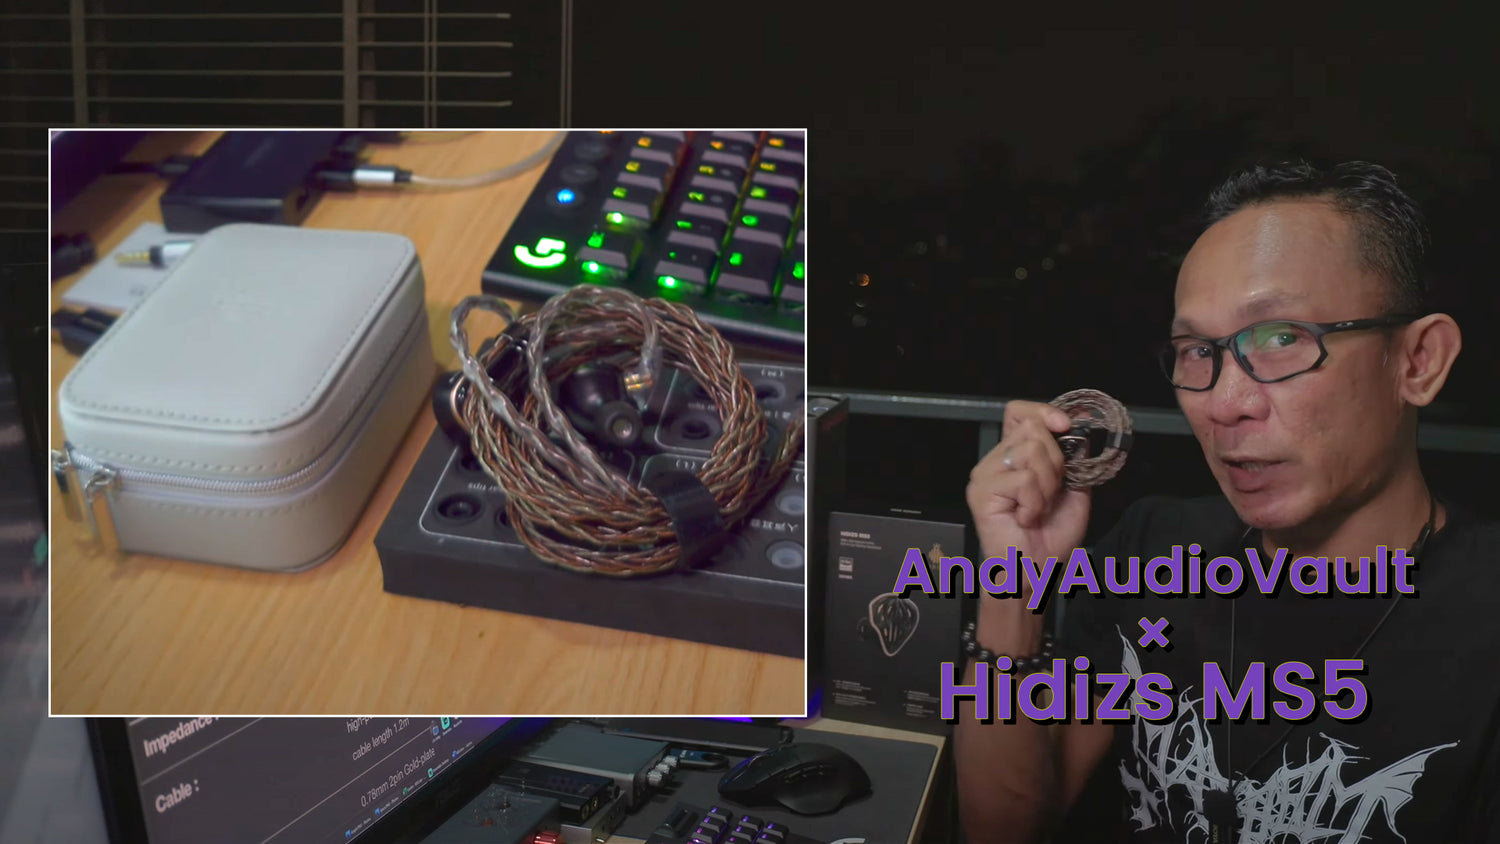 Hidizs MS5 Dark Angel Full Review & Comparisons - AndyAudioVault